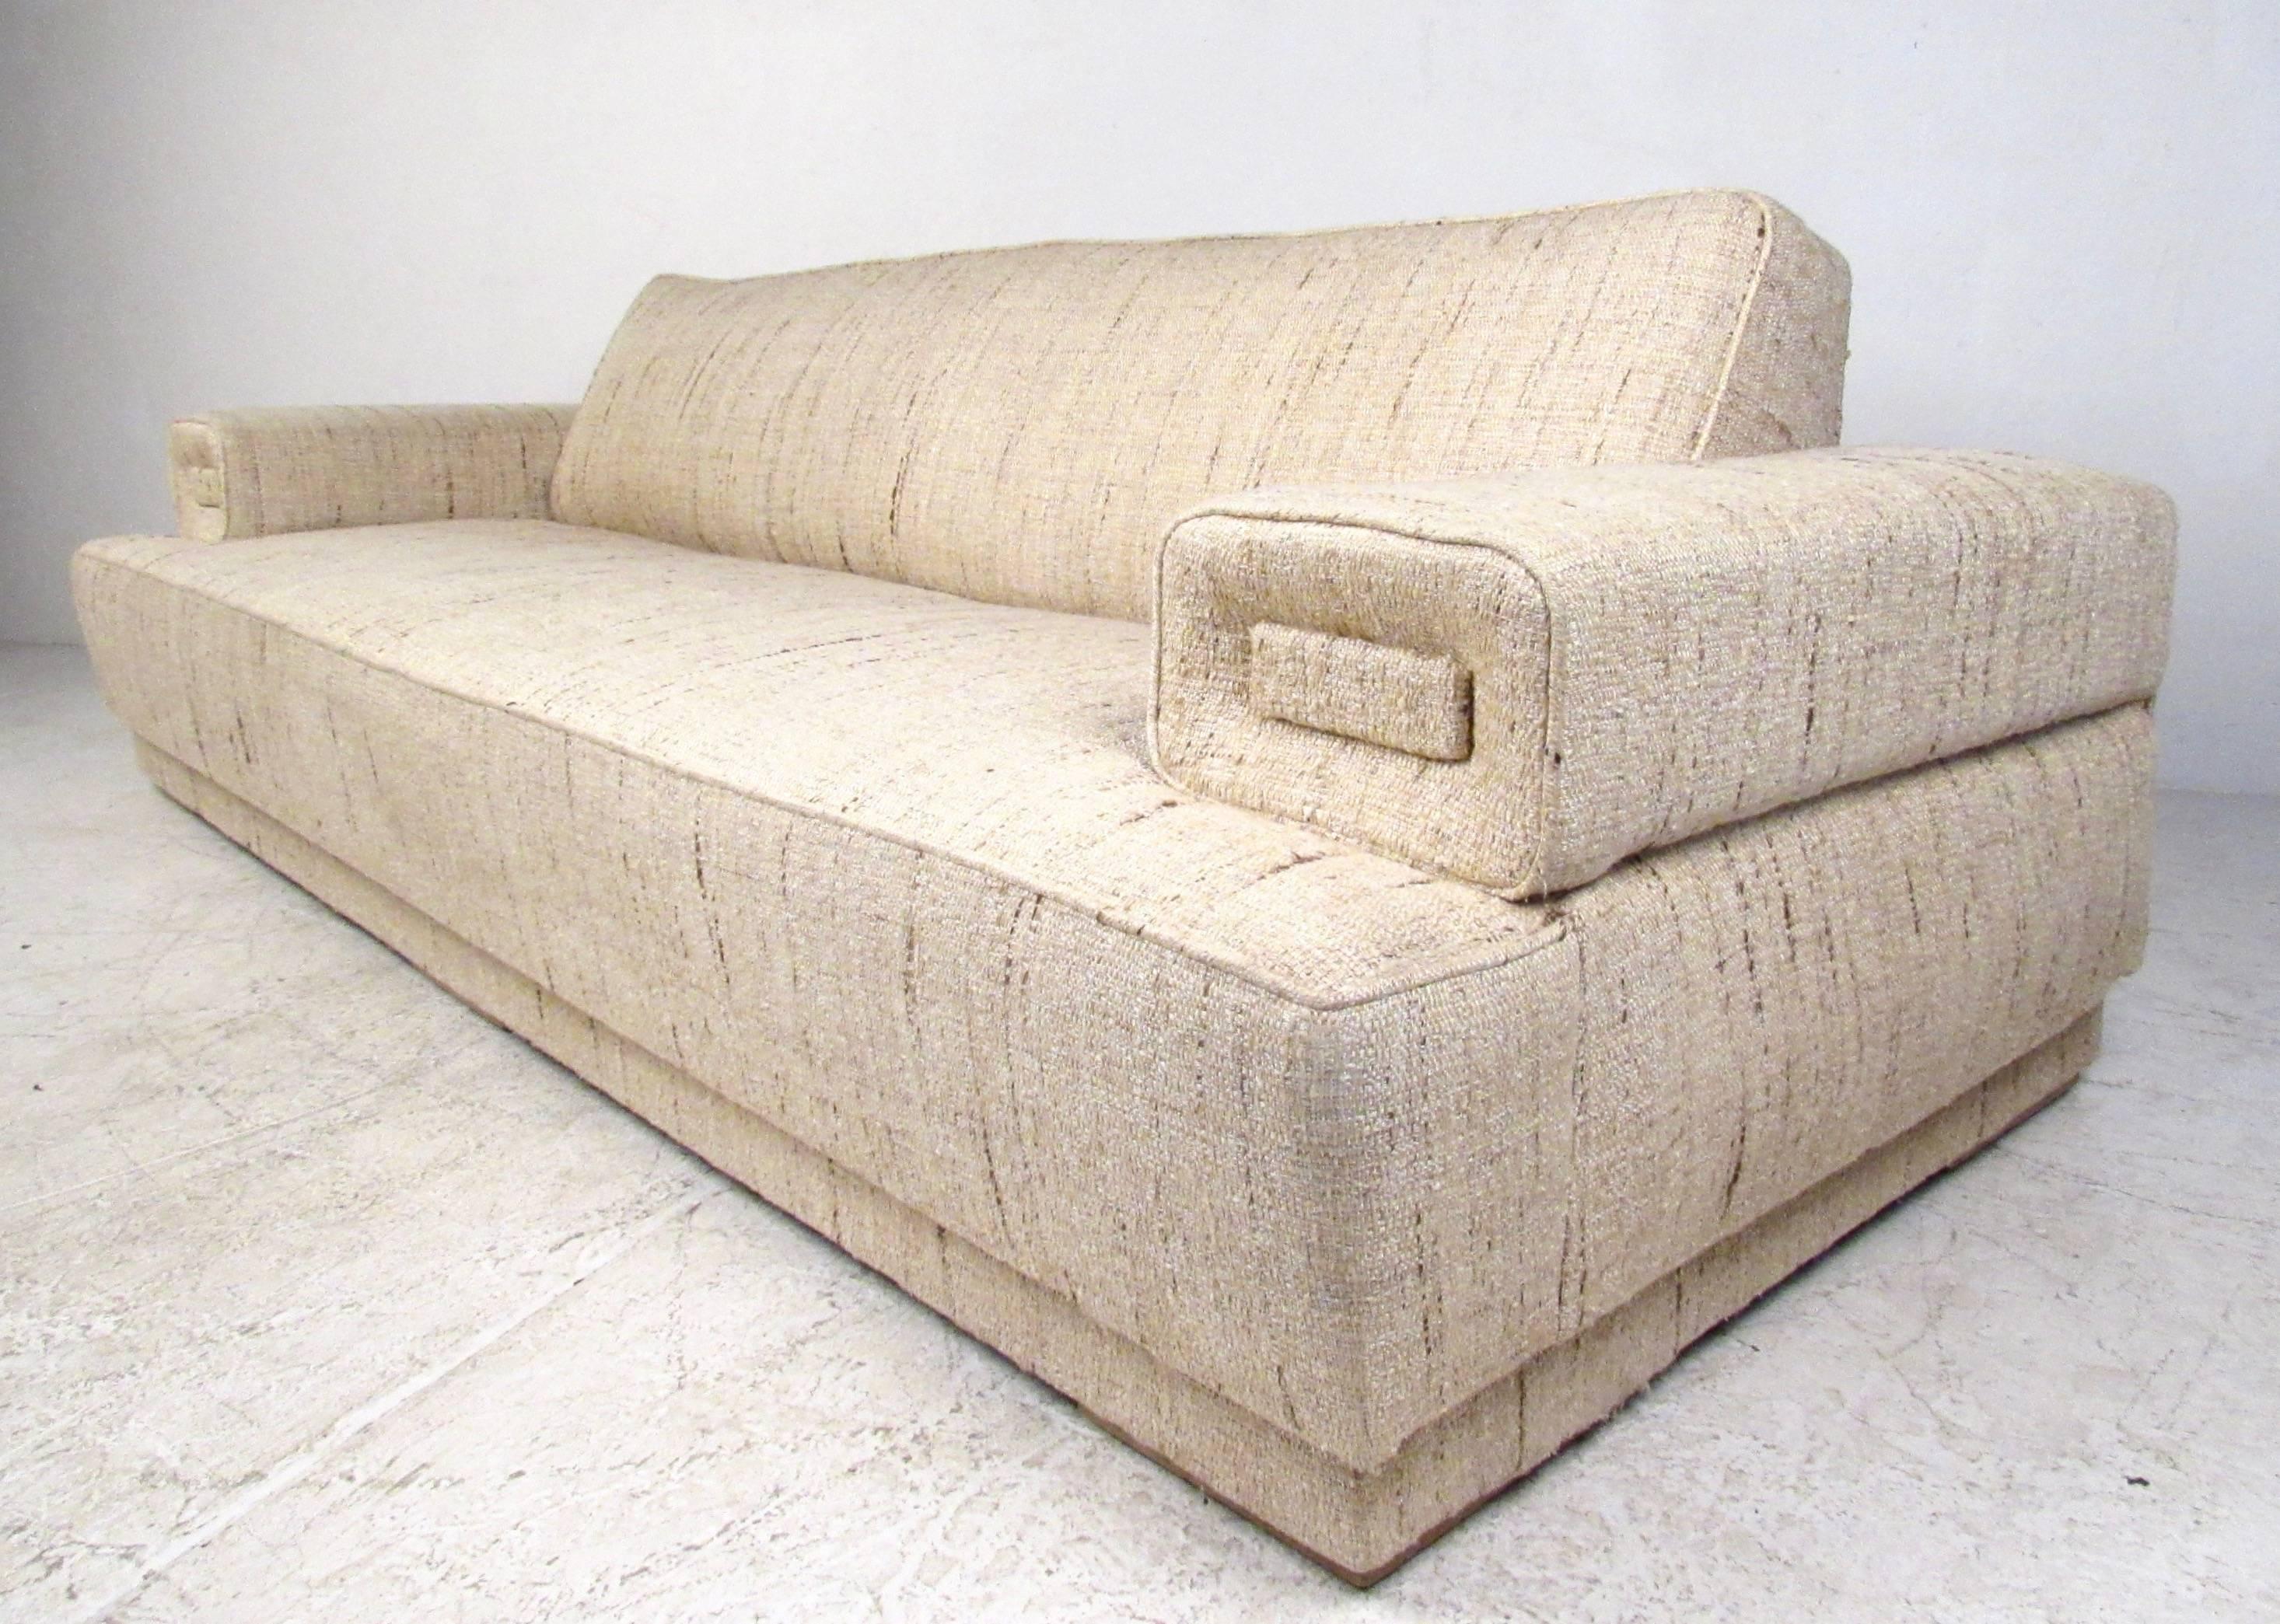 This stunning vintage sofa features intact original fabric and a unique sculpted single seat design. This visually impressive Mid-Century sofa is incredibly comfortable while maintaining it's elegant Mid-Century appeal. Please confirm item location